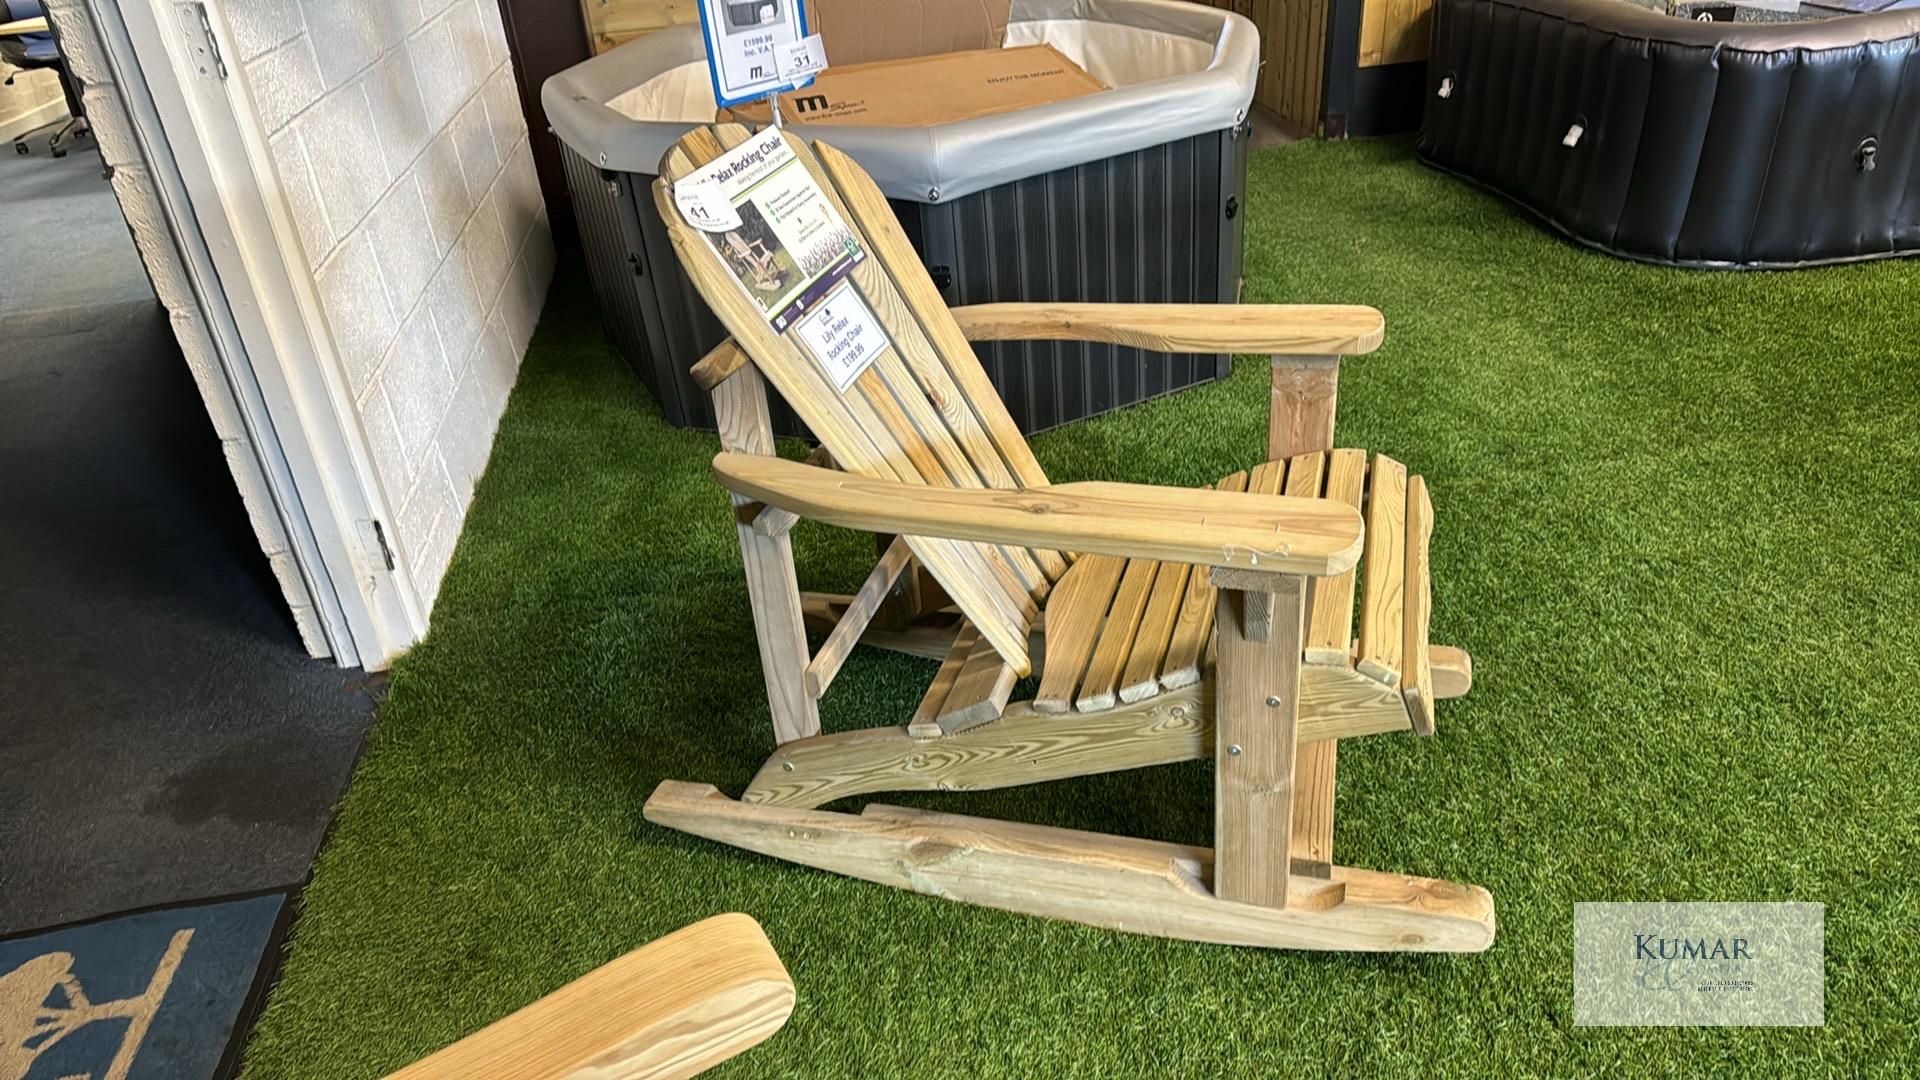 Lily Relax Rocking Chair, Sizes (W x D x H) 0.72m x 1.14m x 0.99m RRP £199.99 - Image 3 of 7